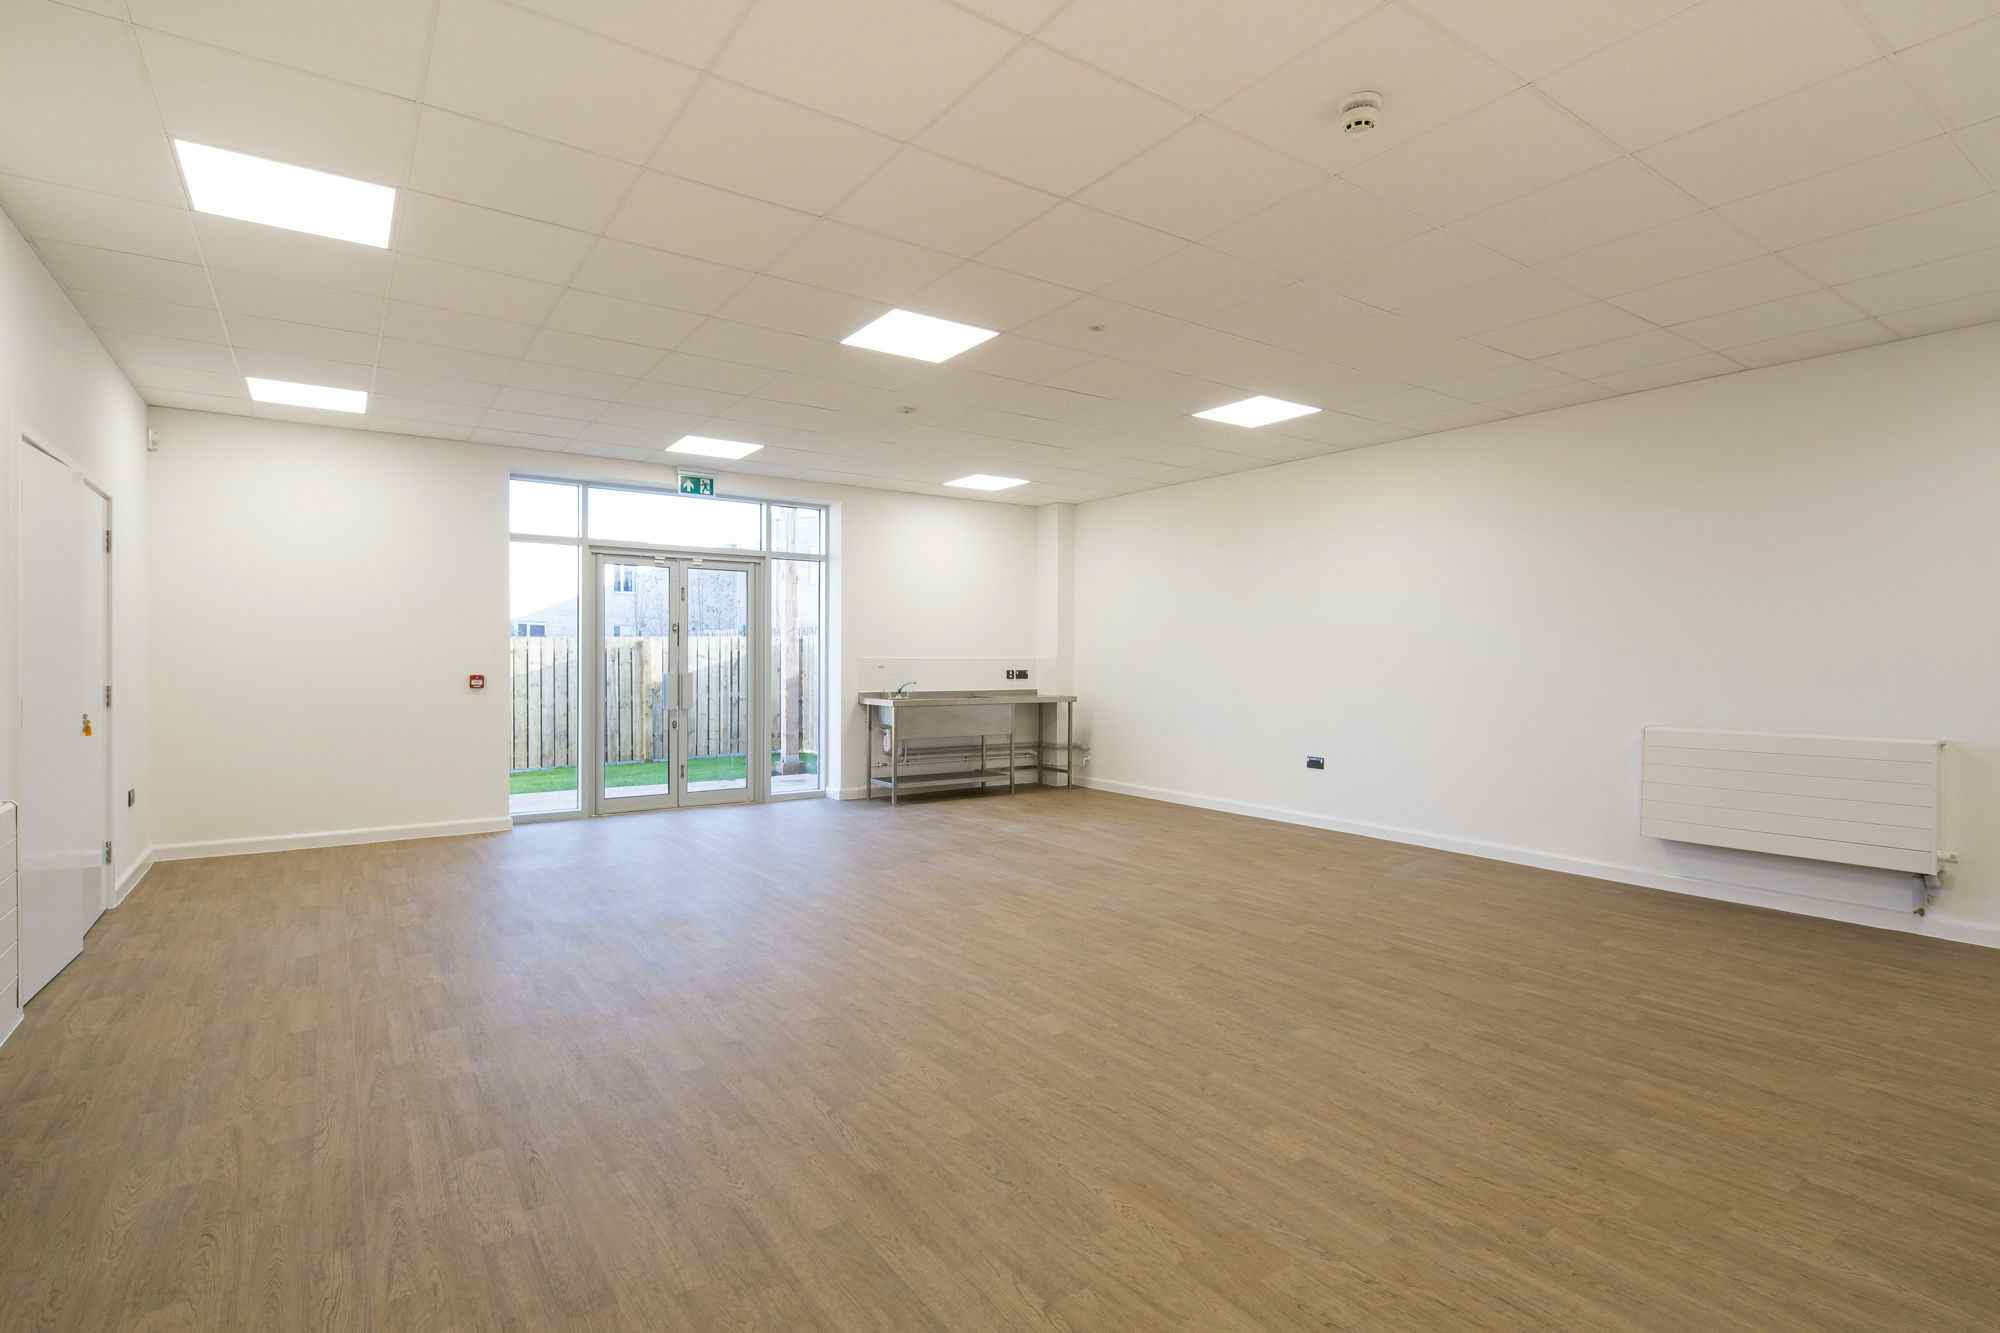 Meeting Room One, Lyde Green Community Centre